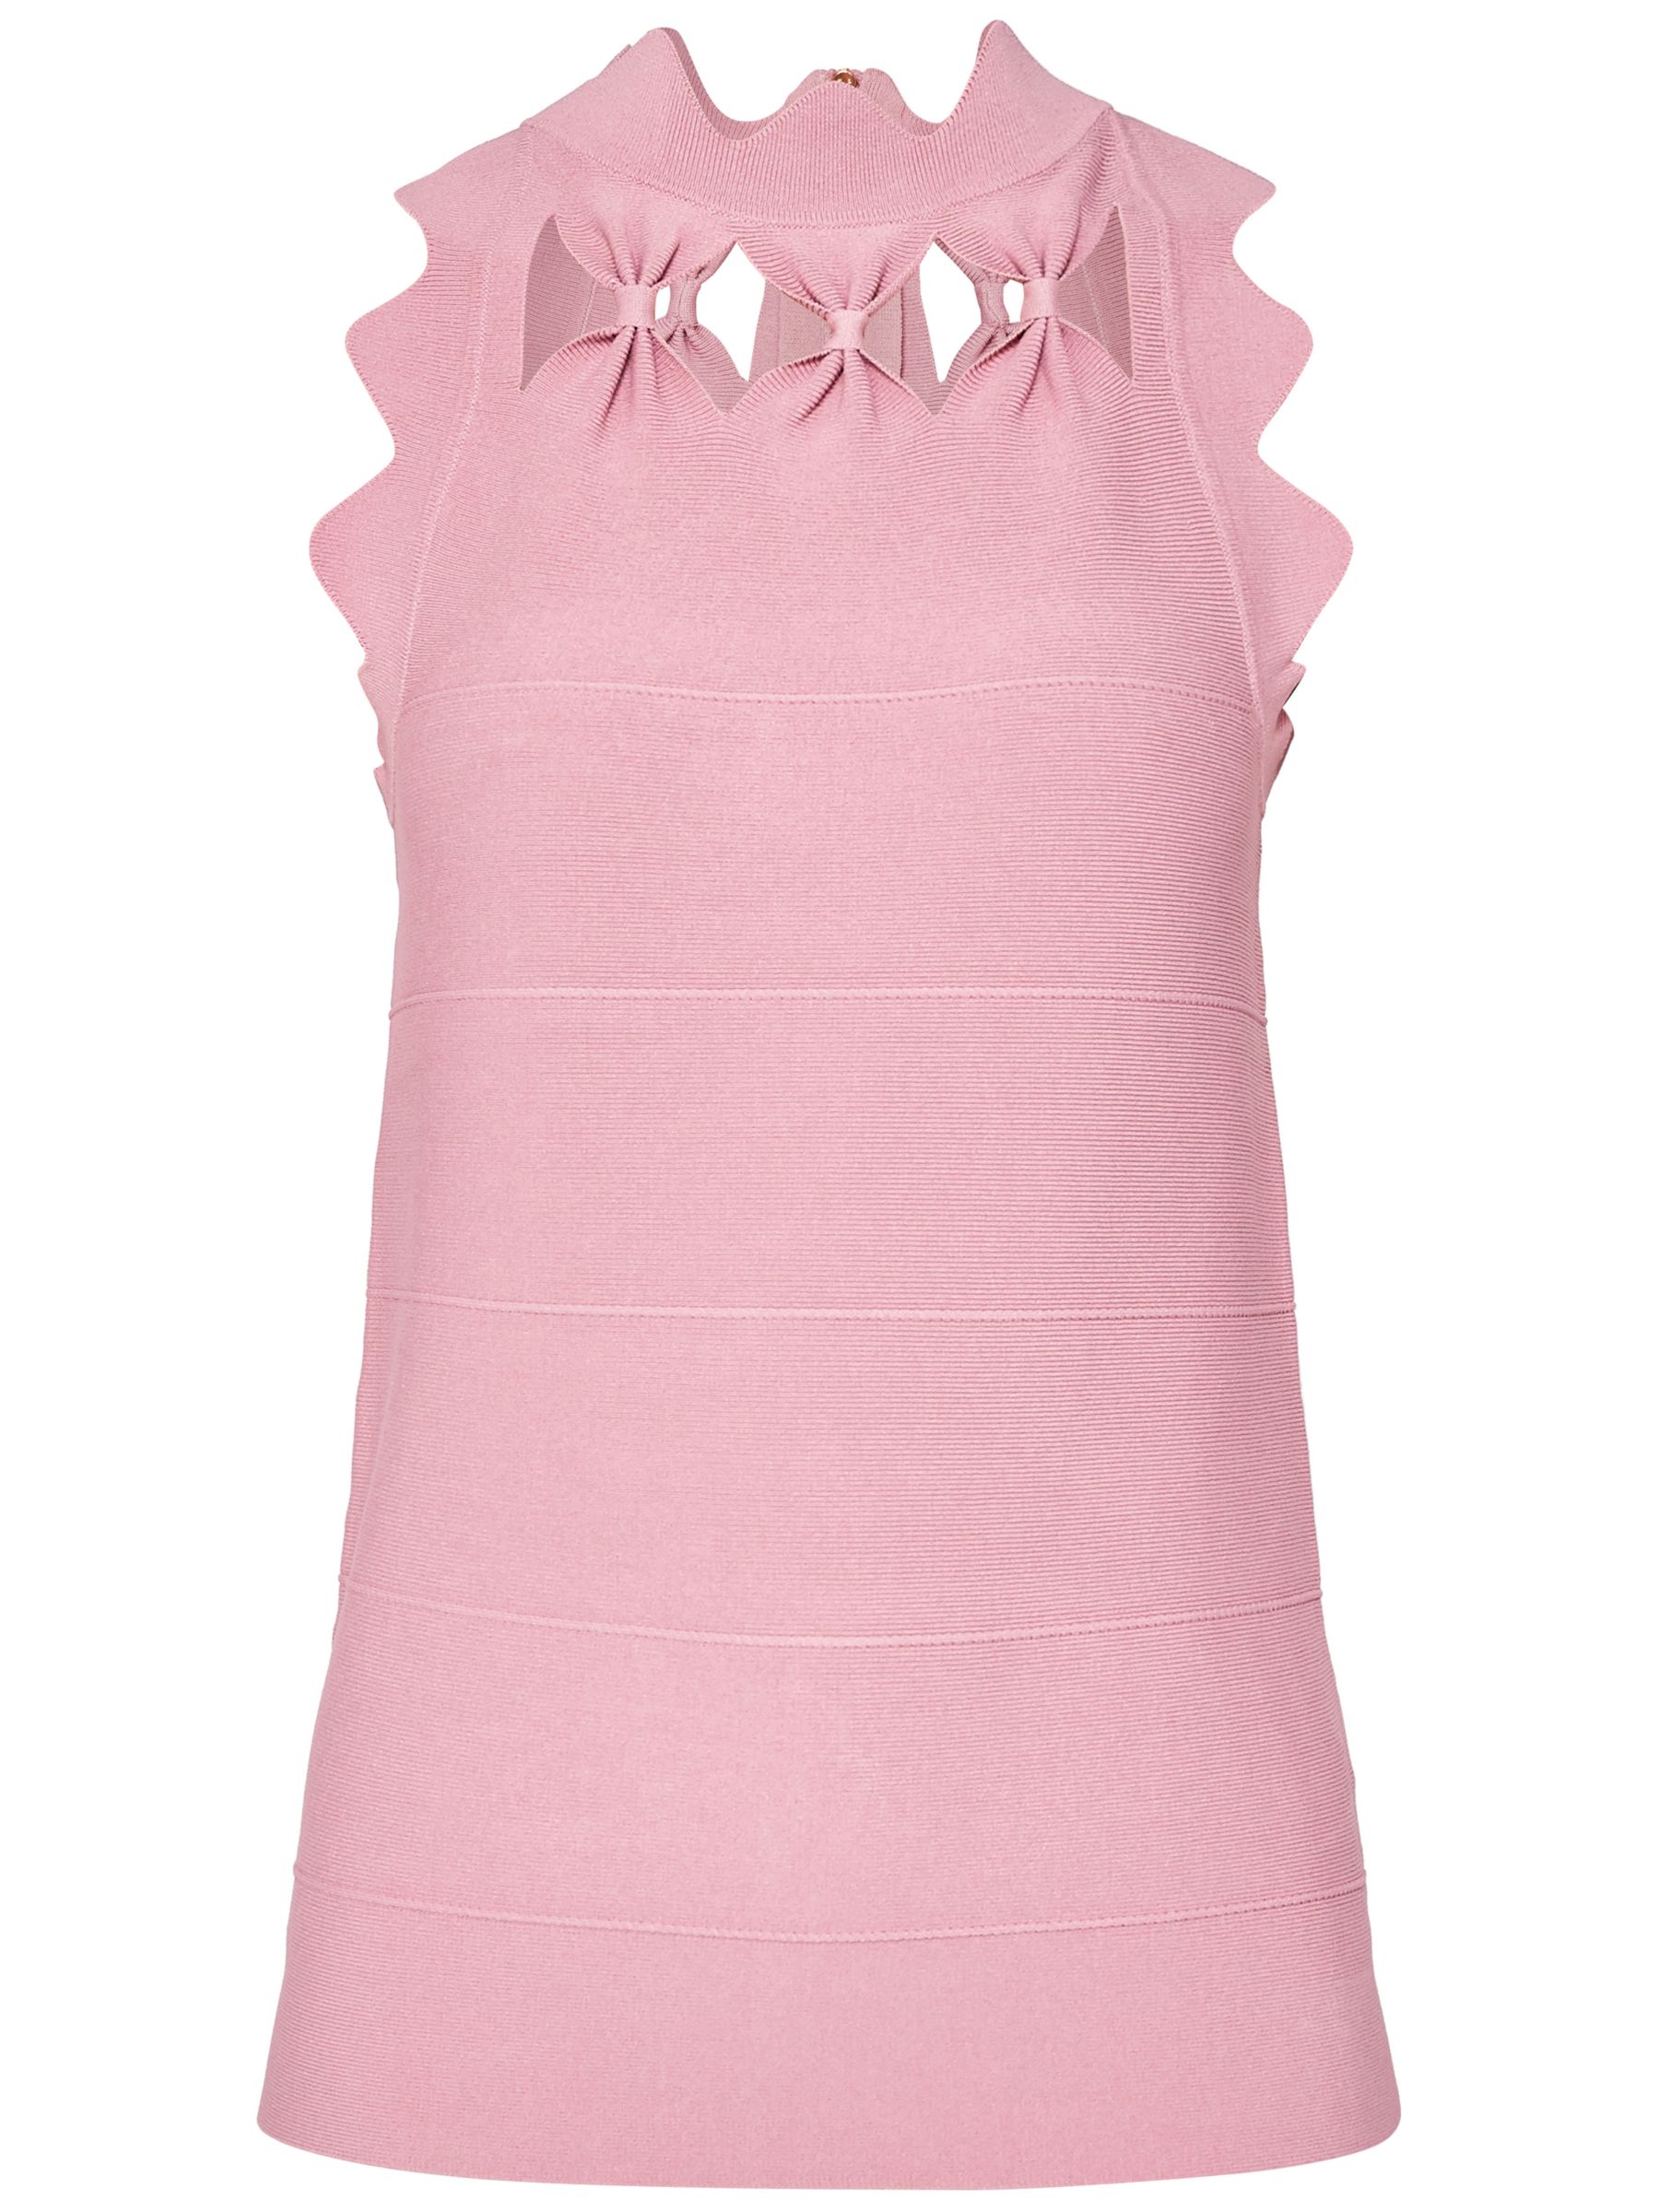 Ted Baker Bow Detail Knit Top, Dusky Pink